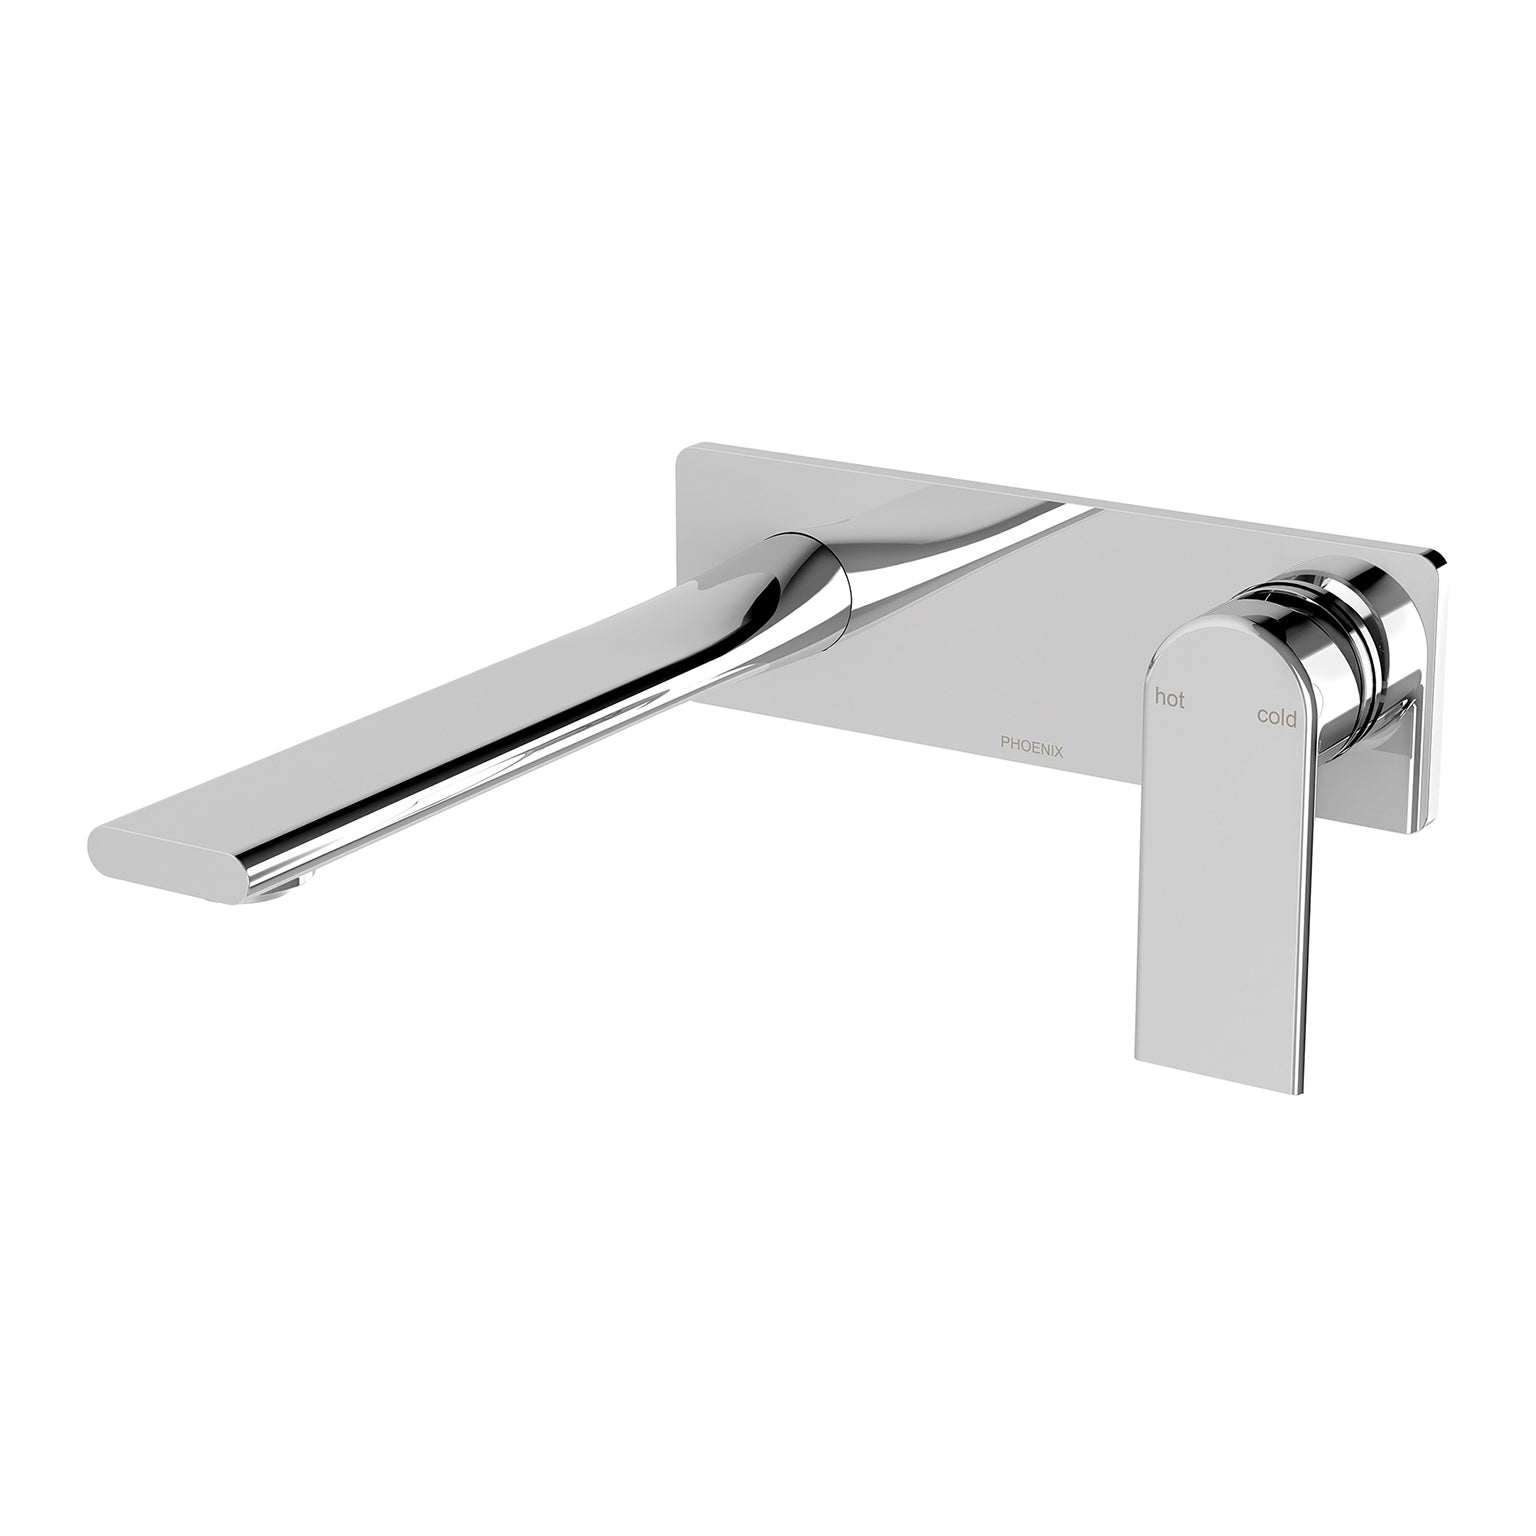 PHOENIX TEEL SWITCHMIX WALL BASIN / BATH MIXER SET FIT-OFF AND ROUGH-IN KIT 200MM CHROME